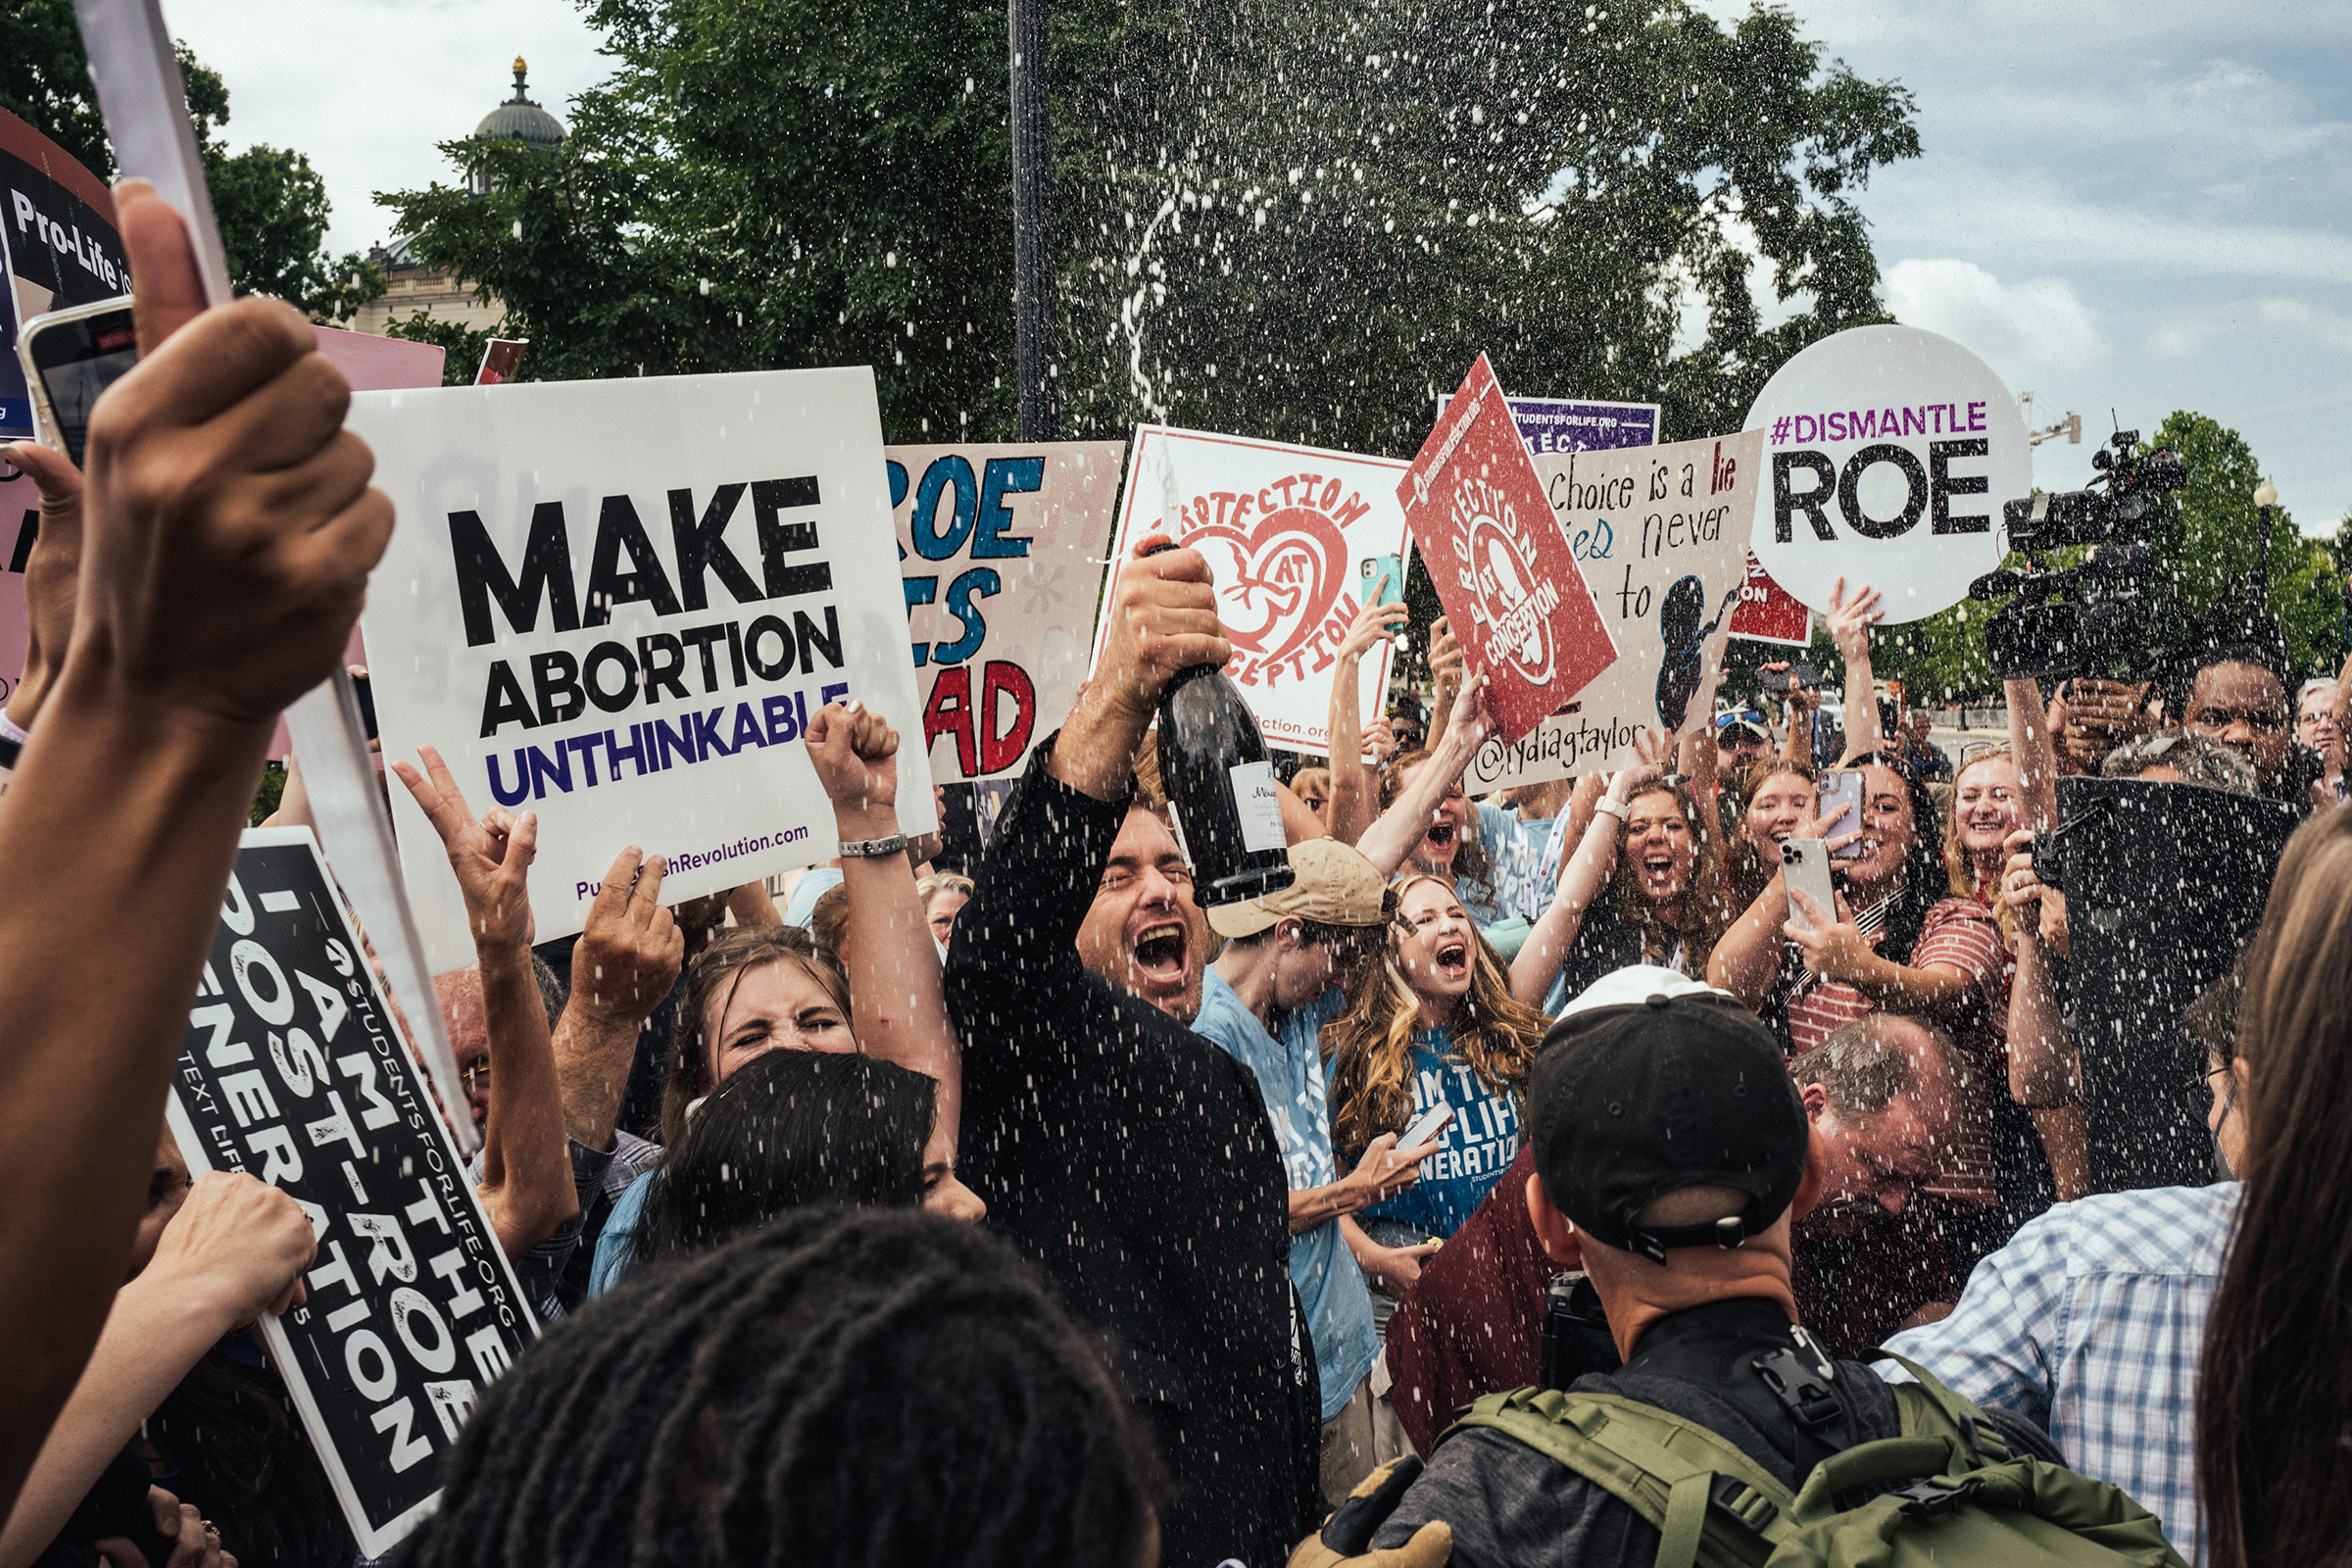 Anti-abortion demonstrators celebrate after the Supreme Cour​t decision overturning Roe v. ​Wade is announced, in Washingt​on, D.C., on June 24, 2022. (Stephen Voss—Redux)